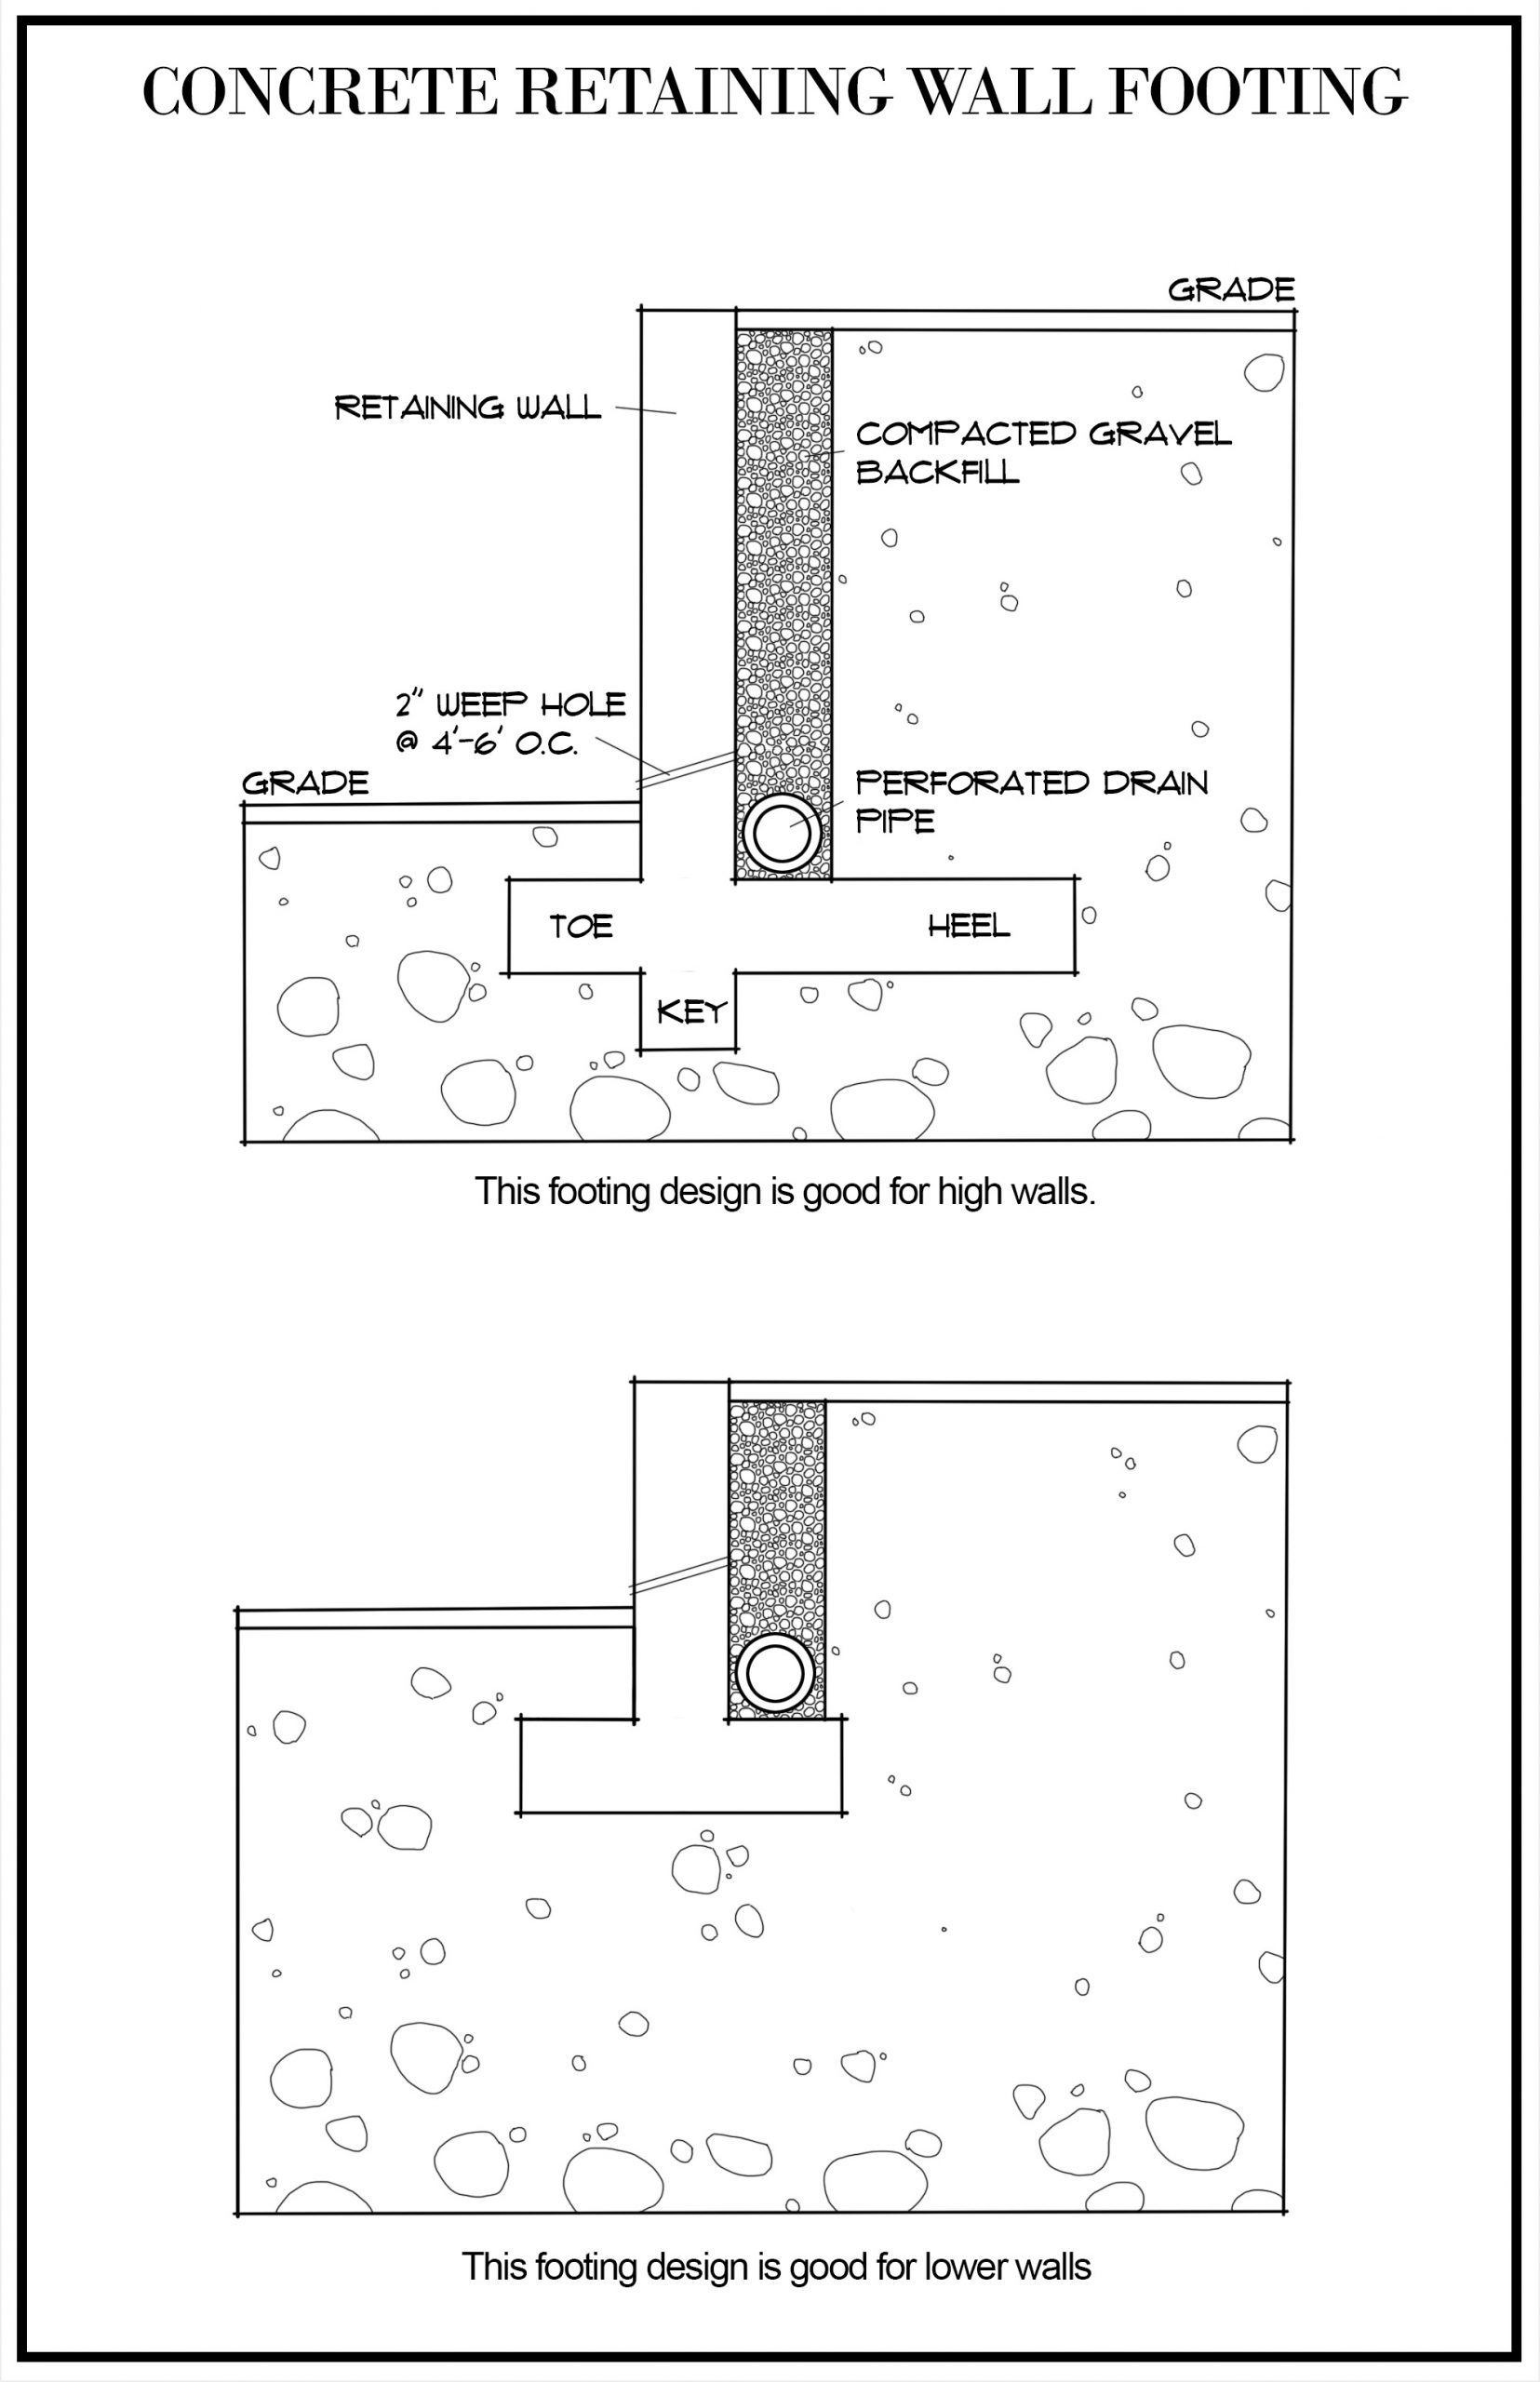 concrete retaining wall footing infographic 1b